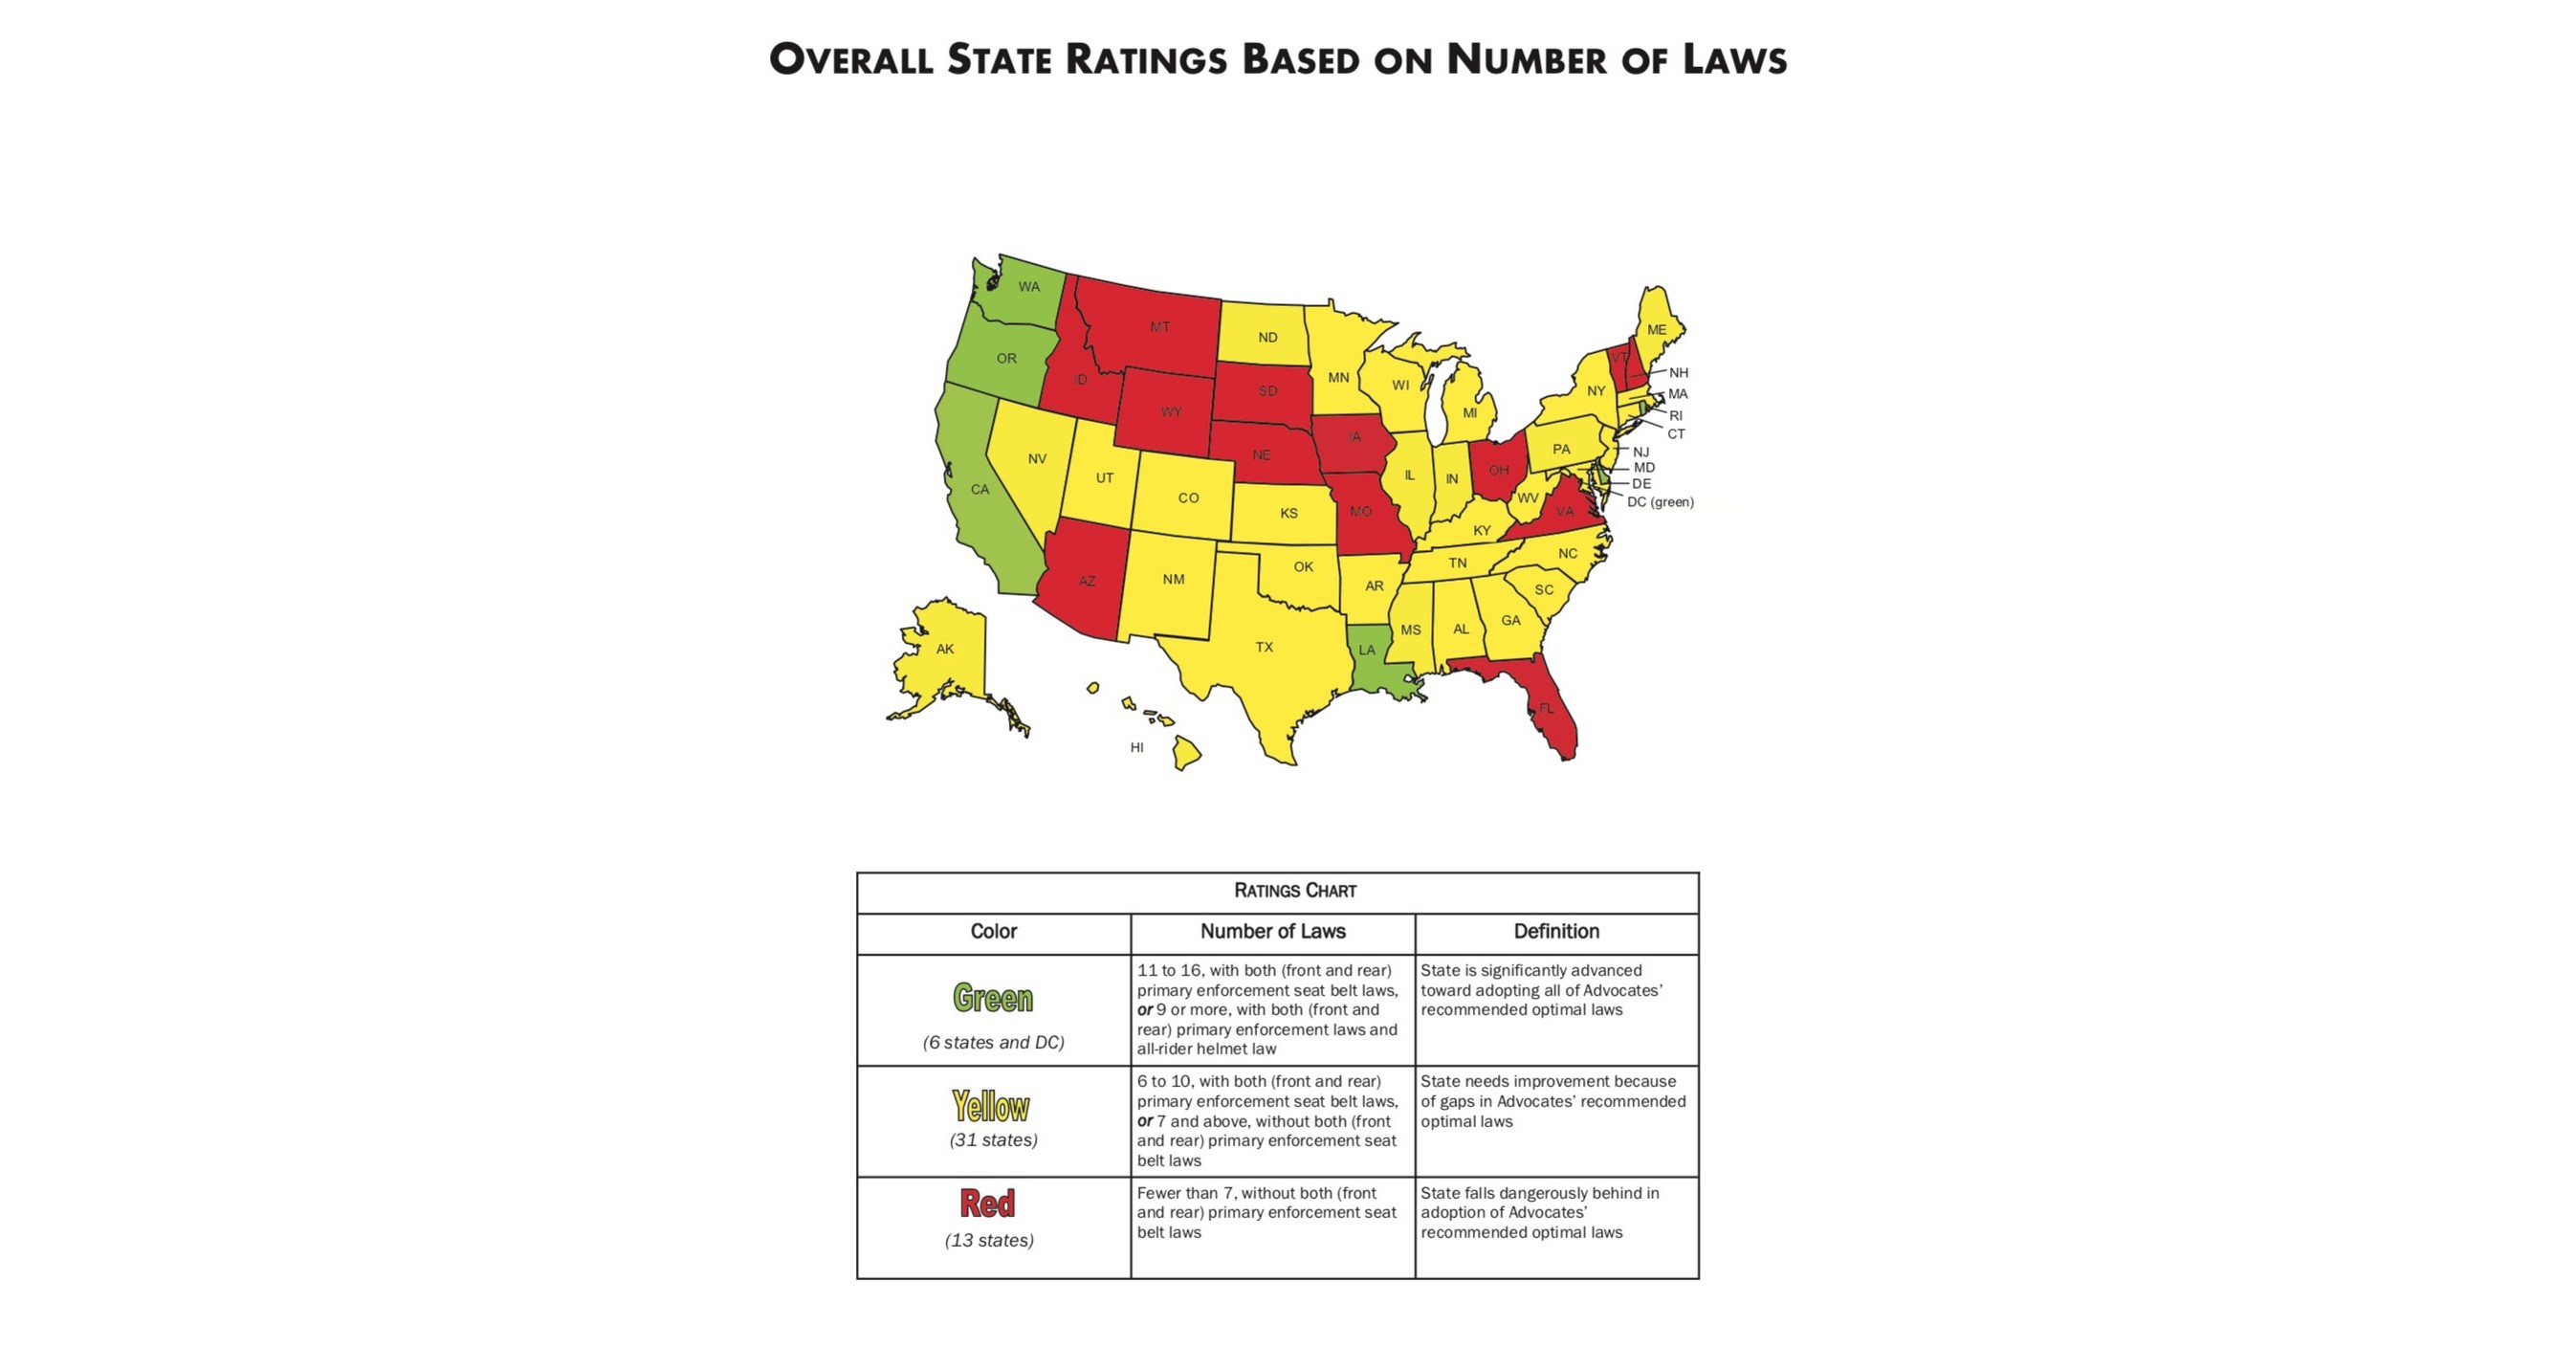 Advocates For Highway And Auto Safety Unveils 2018 Roadmap Report Grading Each State And Dc On 4083